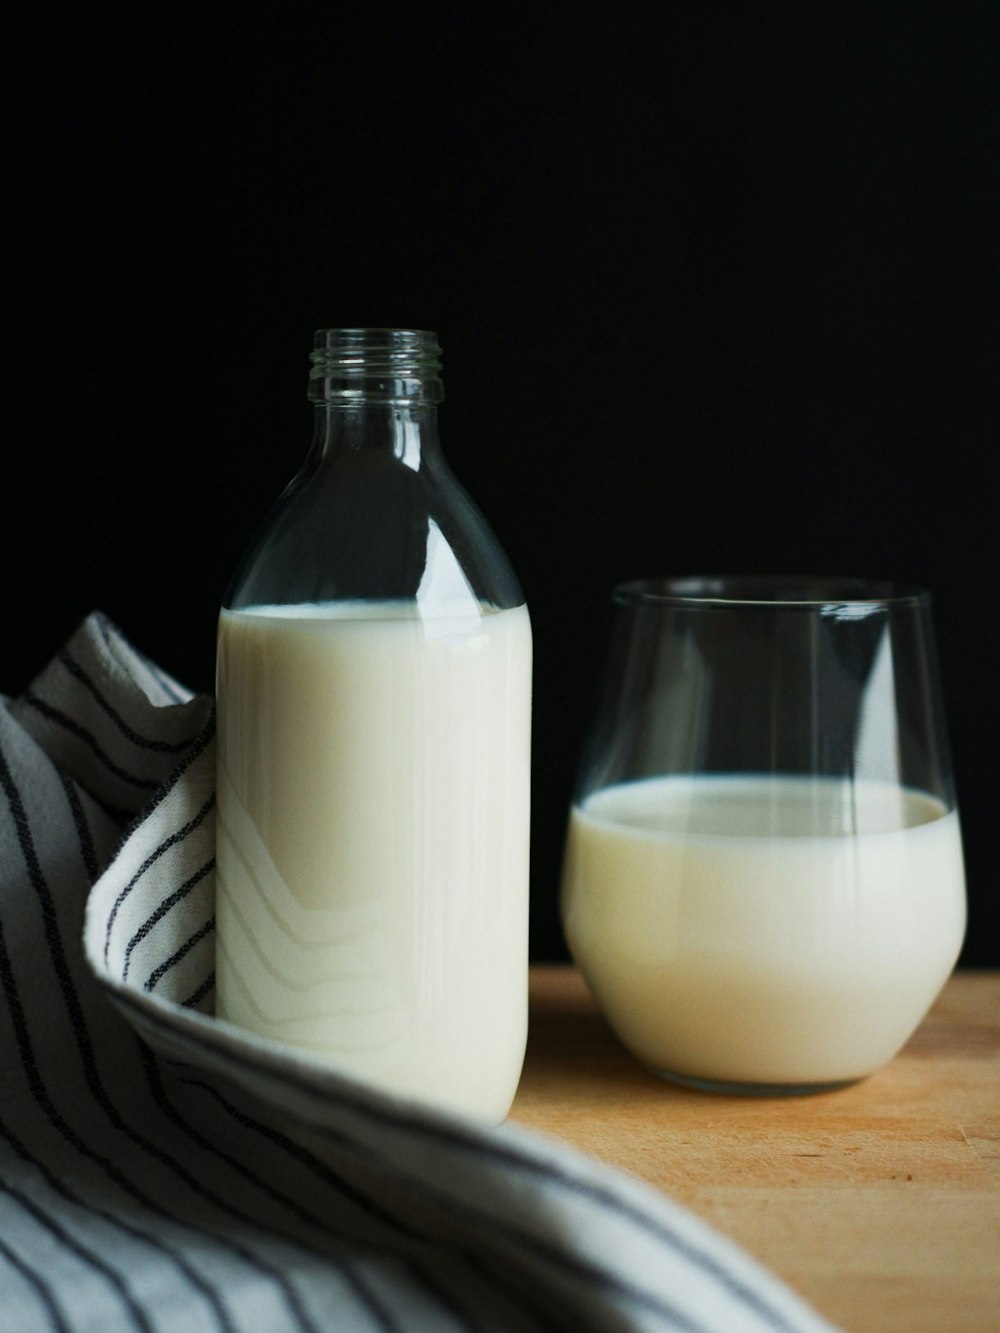 a bottle of milk next to a glass of milk